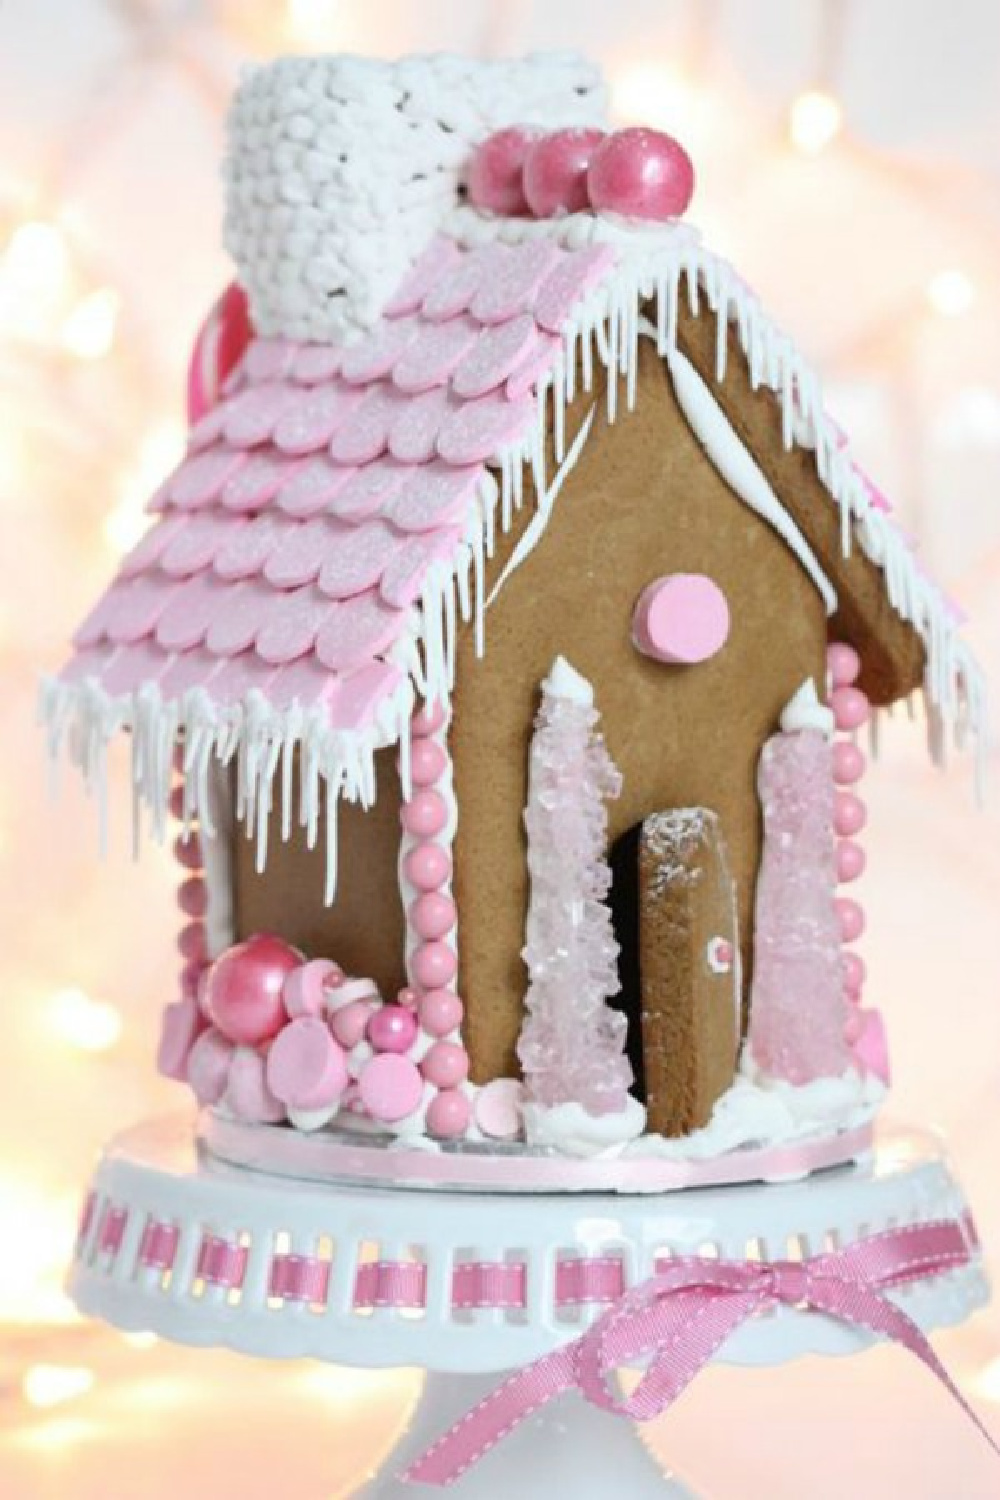 Charming pink accents on a gingerbread house cottage with pink rock candy trees. #gingerbreadhouse #pinkchristmas #holidaybaking